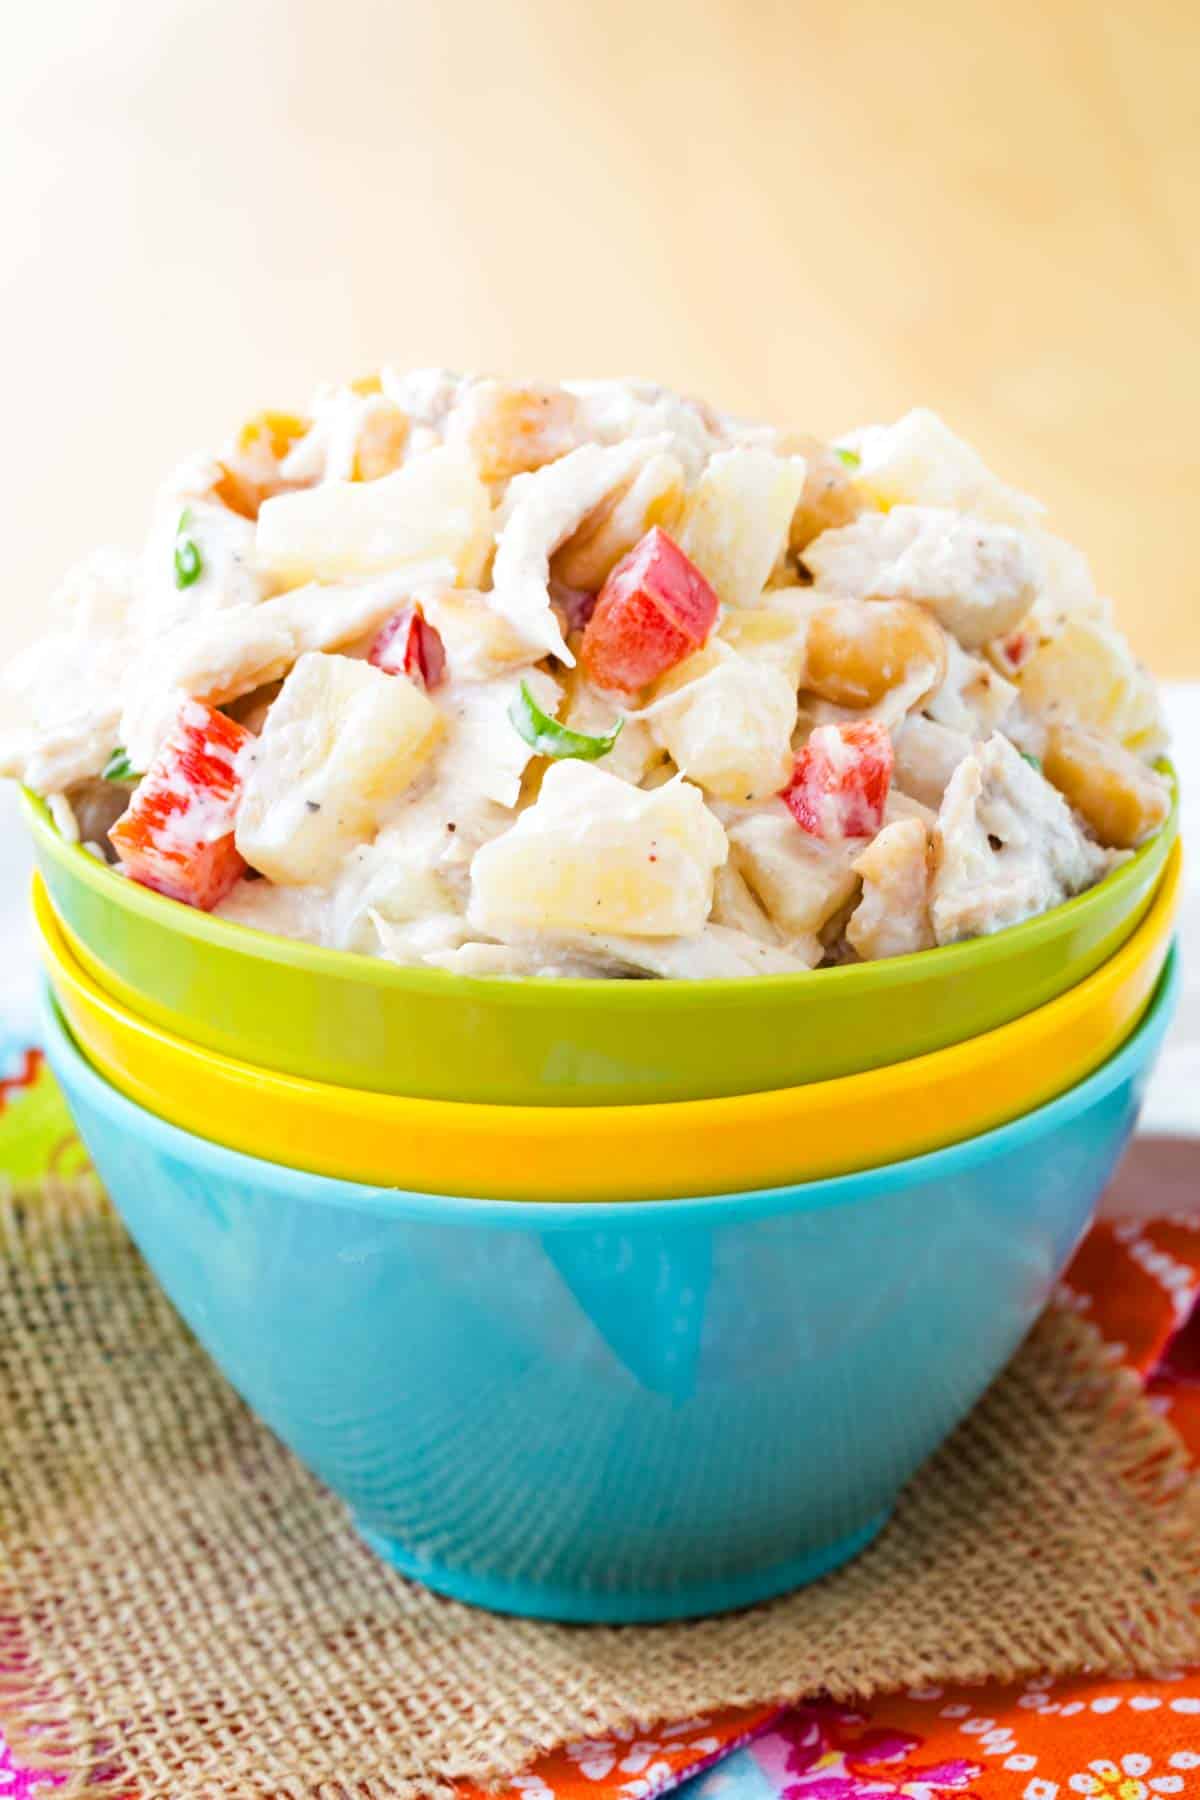 Pineapple chicken salad is served in a stack of multicolored bowls.